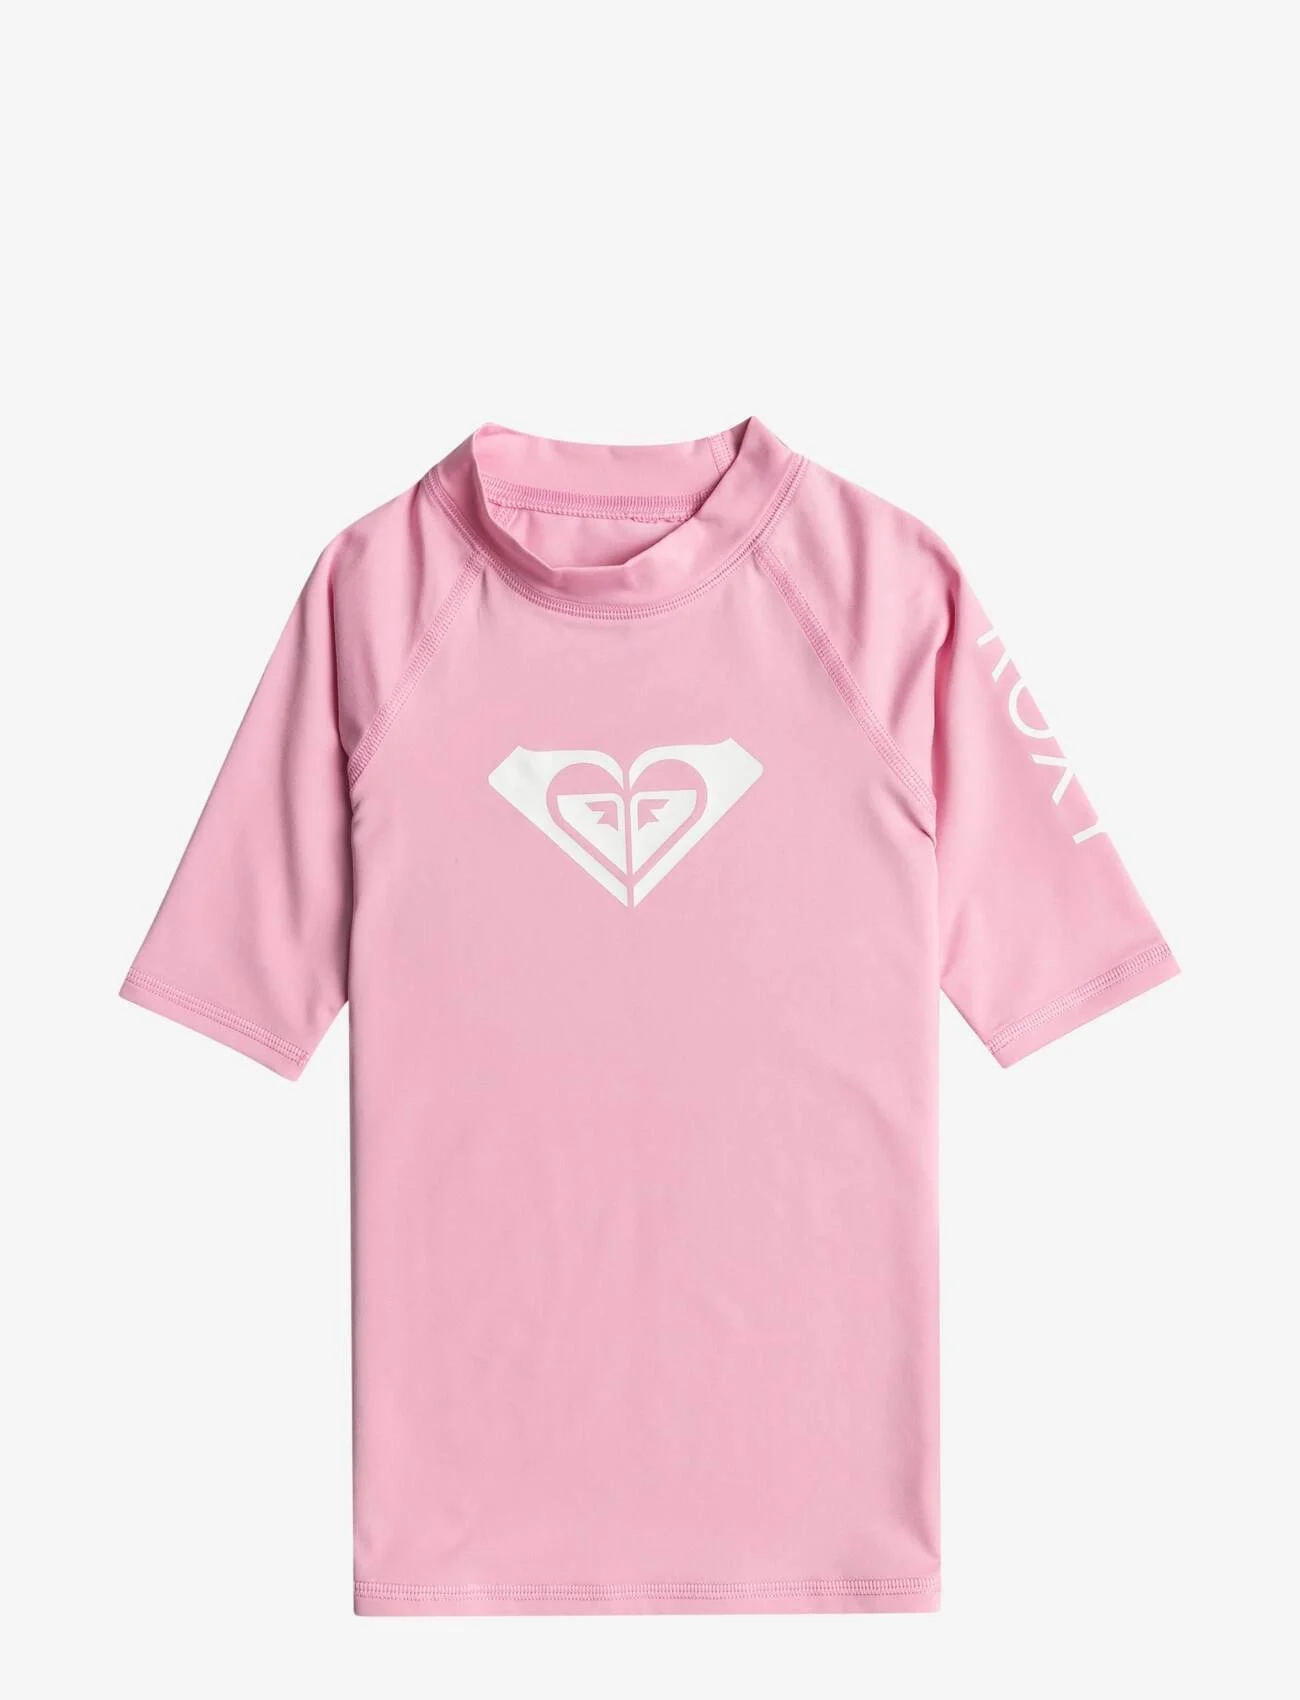 Roxy - WHOLE HEARTED SS - kortermede - prism pink - 0